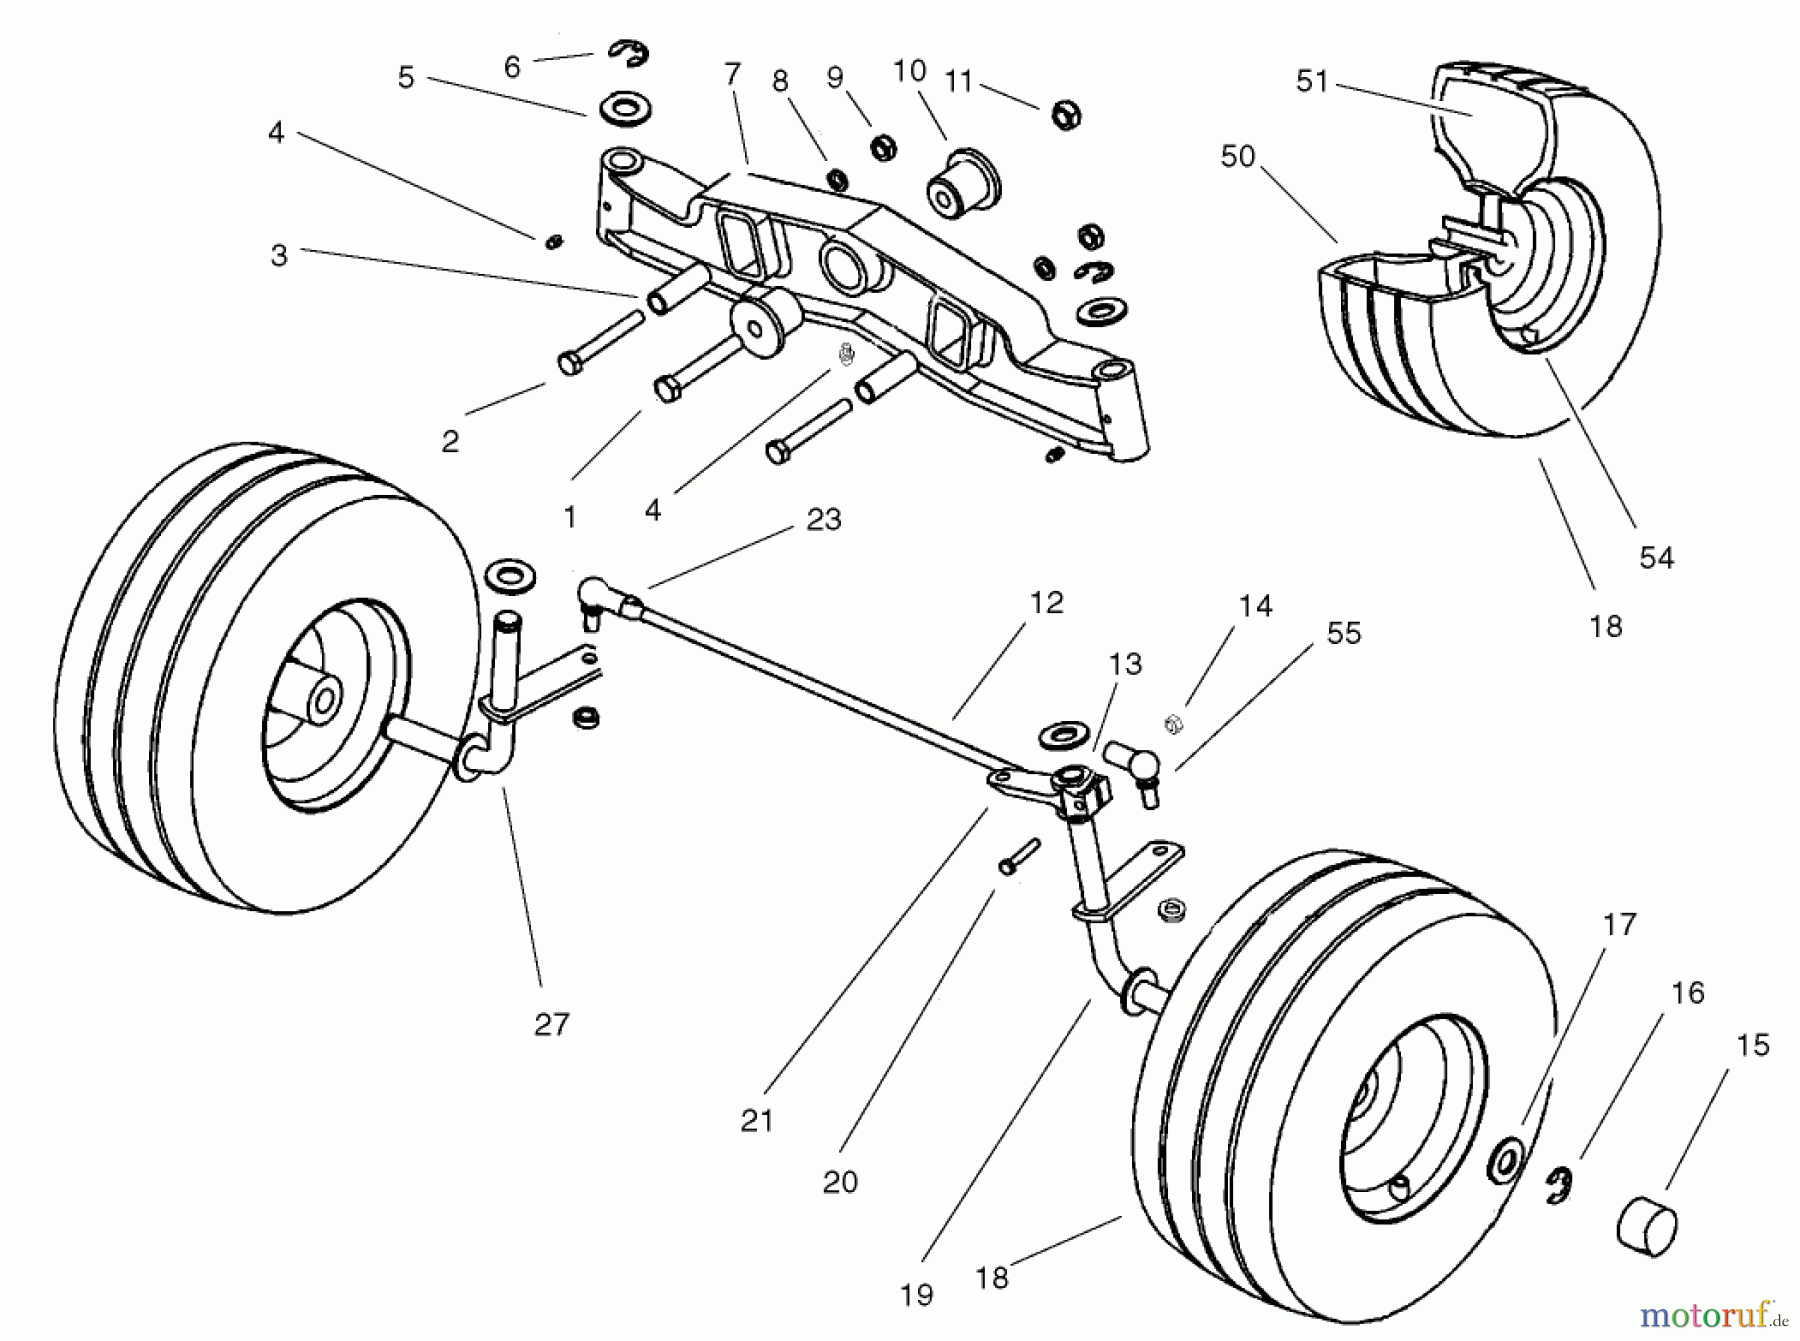  Toro Neu Mowers, Lawn & Garden Tractor Seite 1 74570 (170-DH) - Toro 170-DH Lawn Tractor, 2001 (210000001-210999999) FRONT AXLE ASSEMBLY